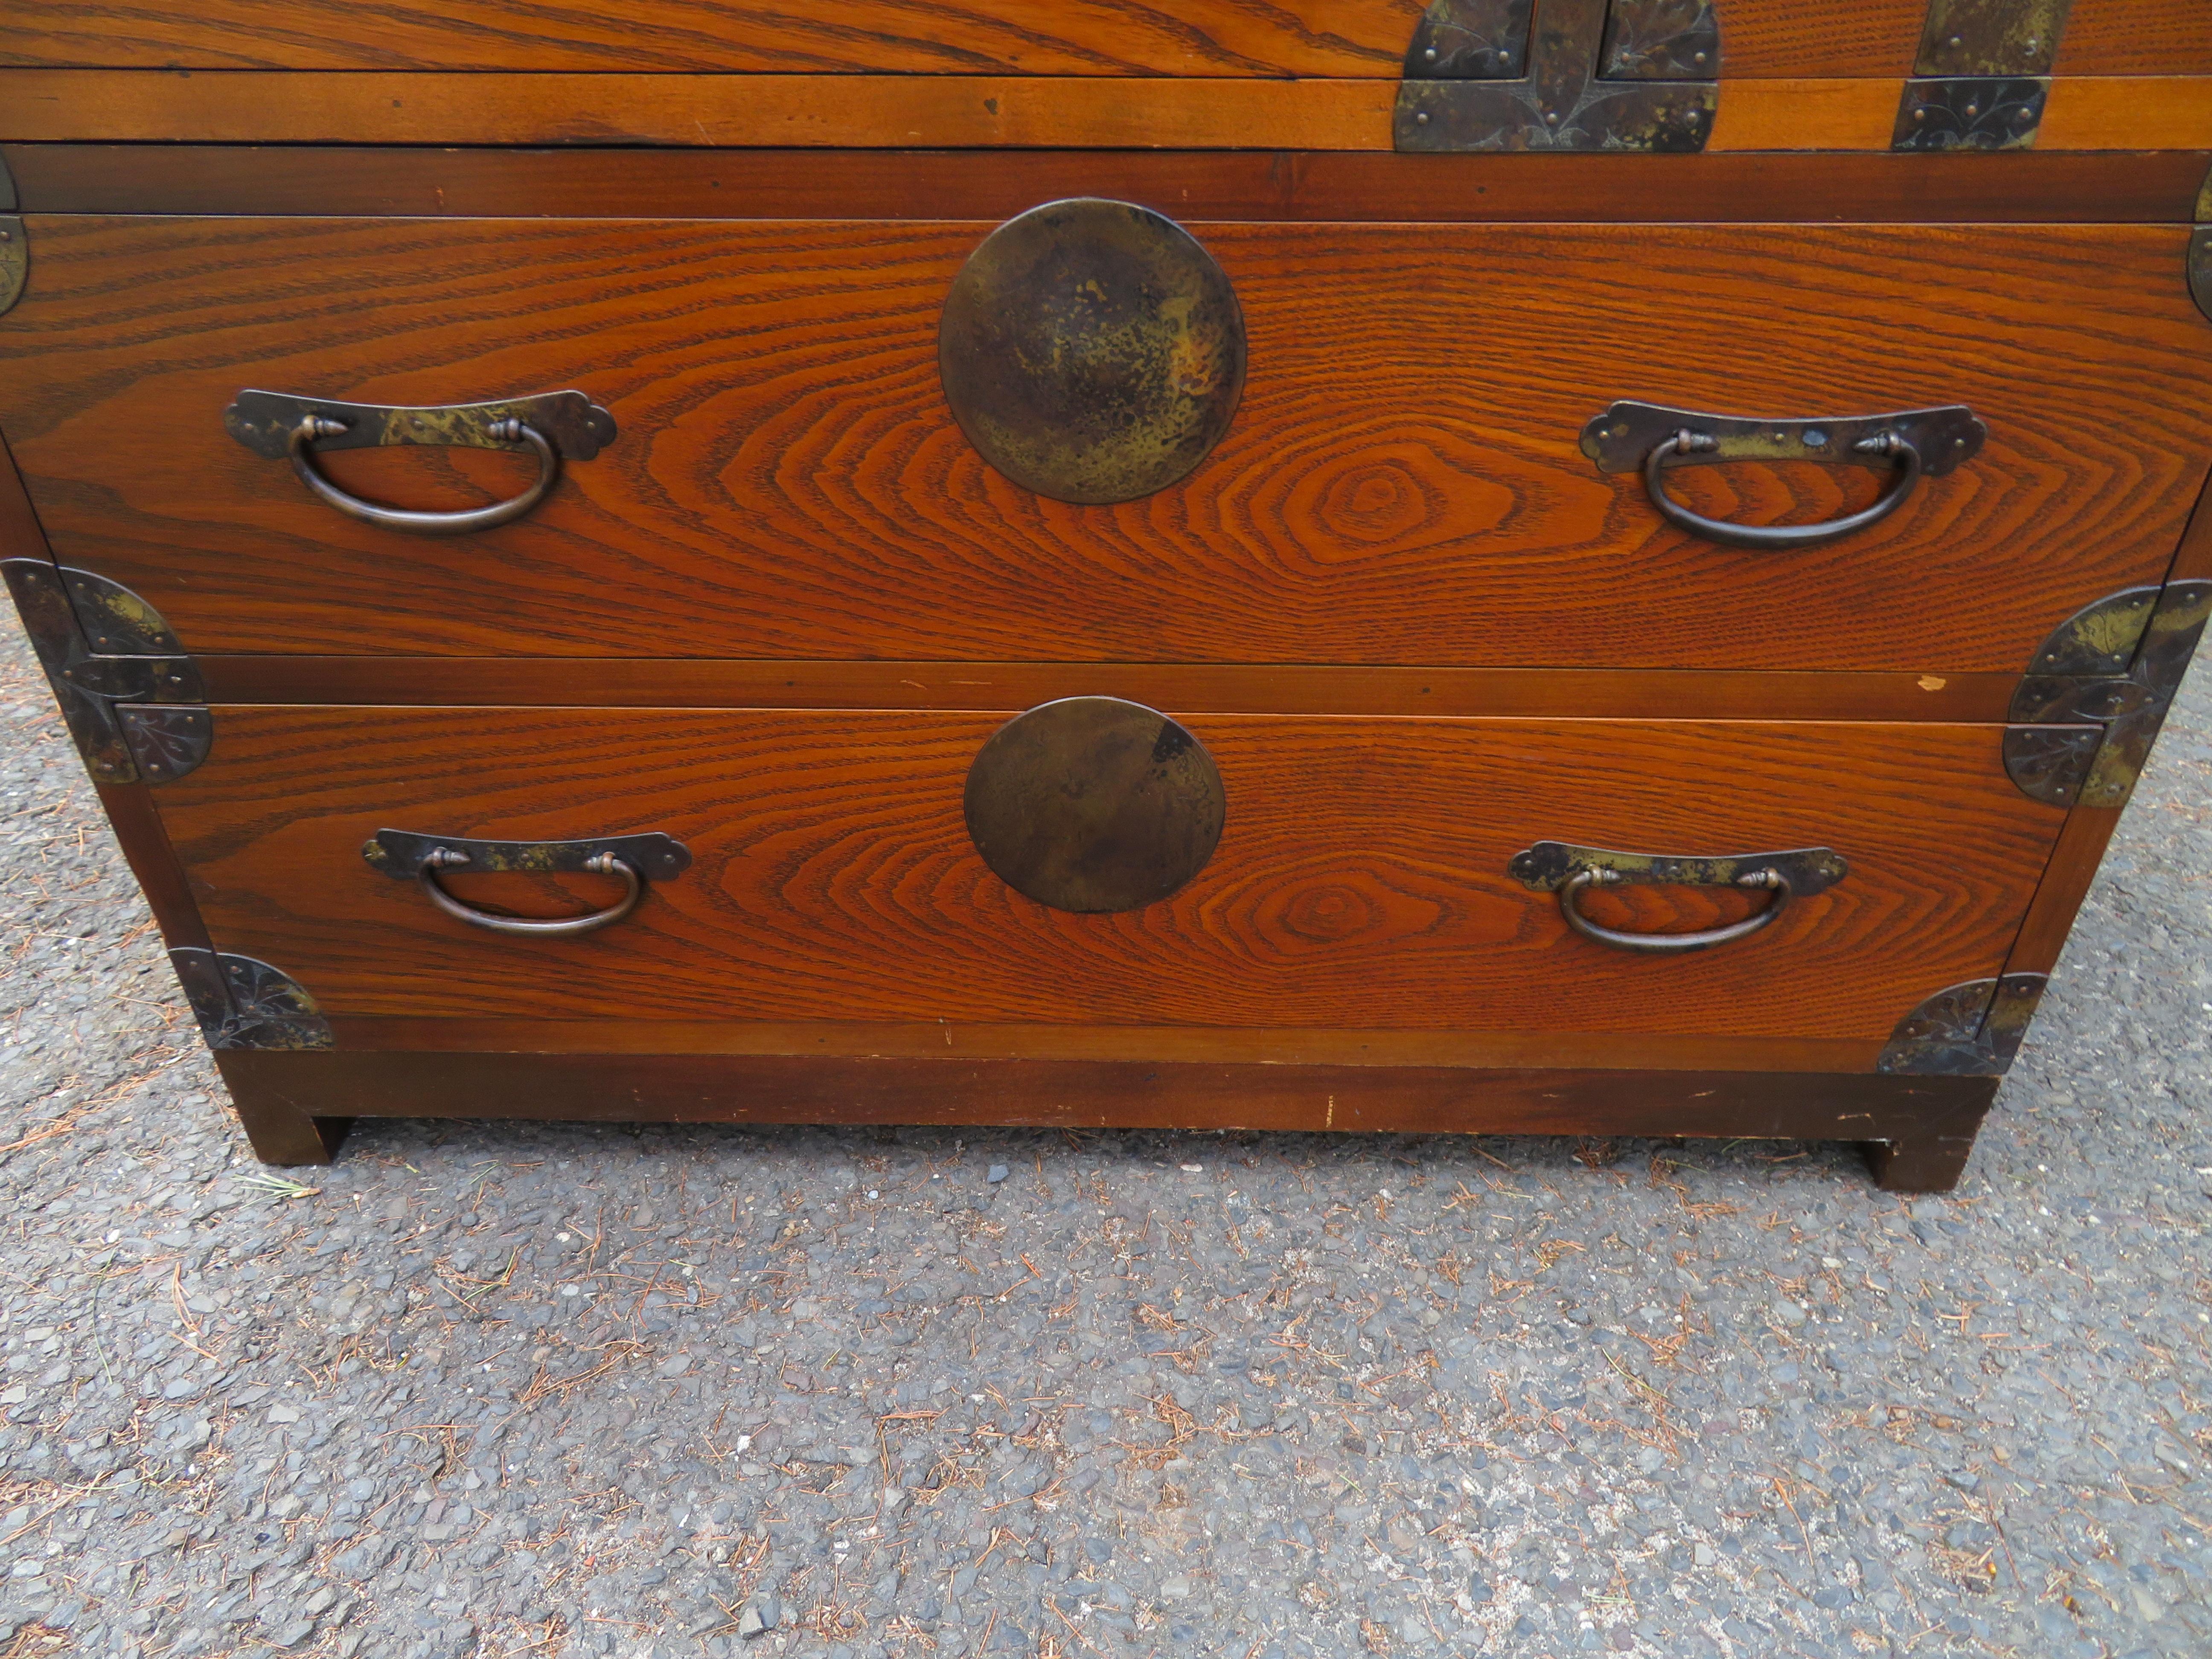 3 Fabulous 20th Century Japanese style Stacking Tansu Chest of Drawers In Good Condition For Sale In Pemberton, NJ